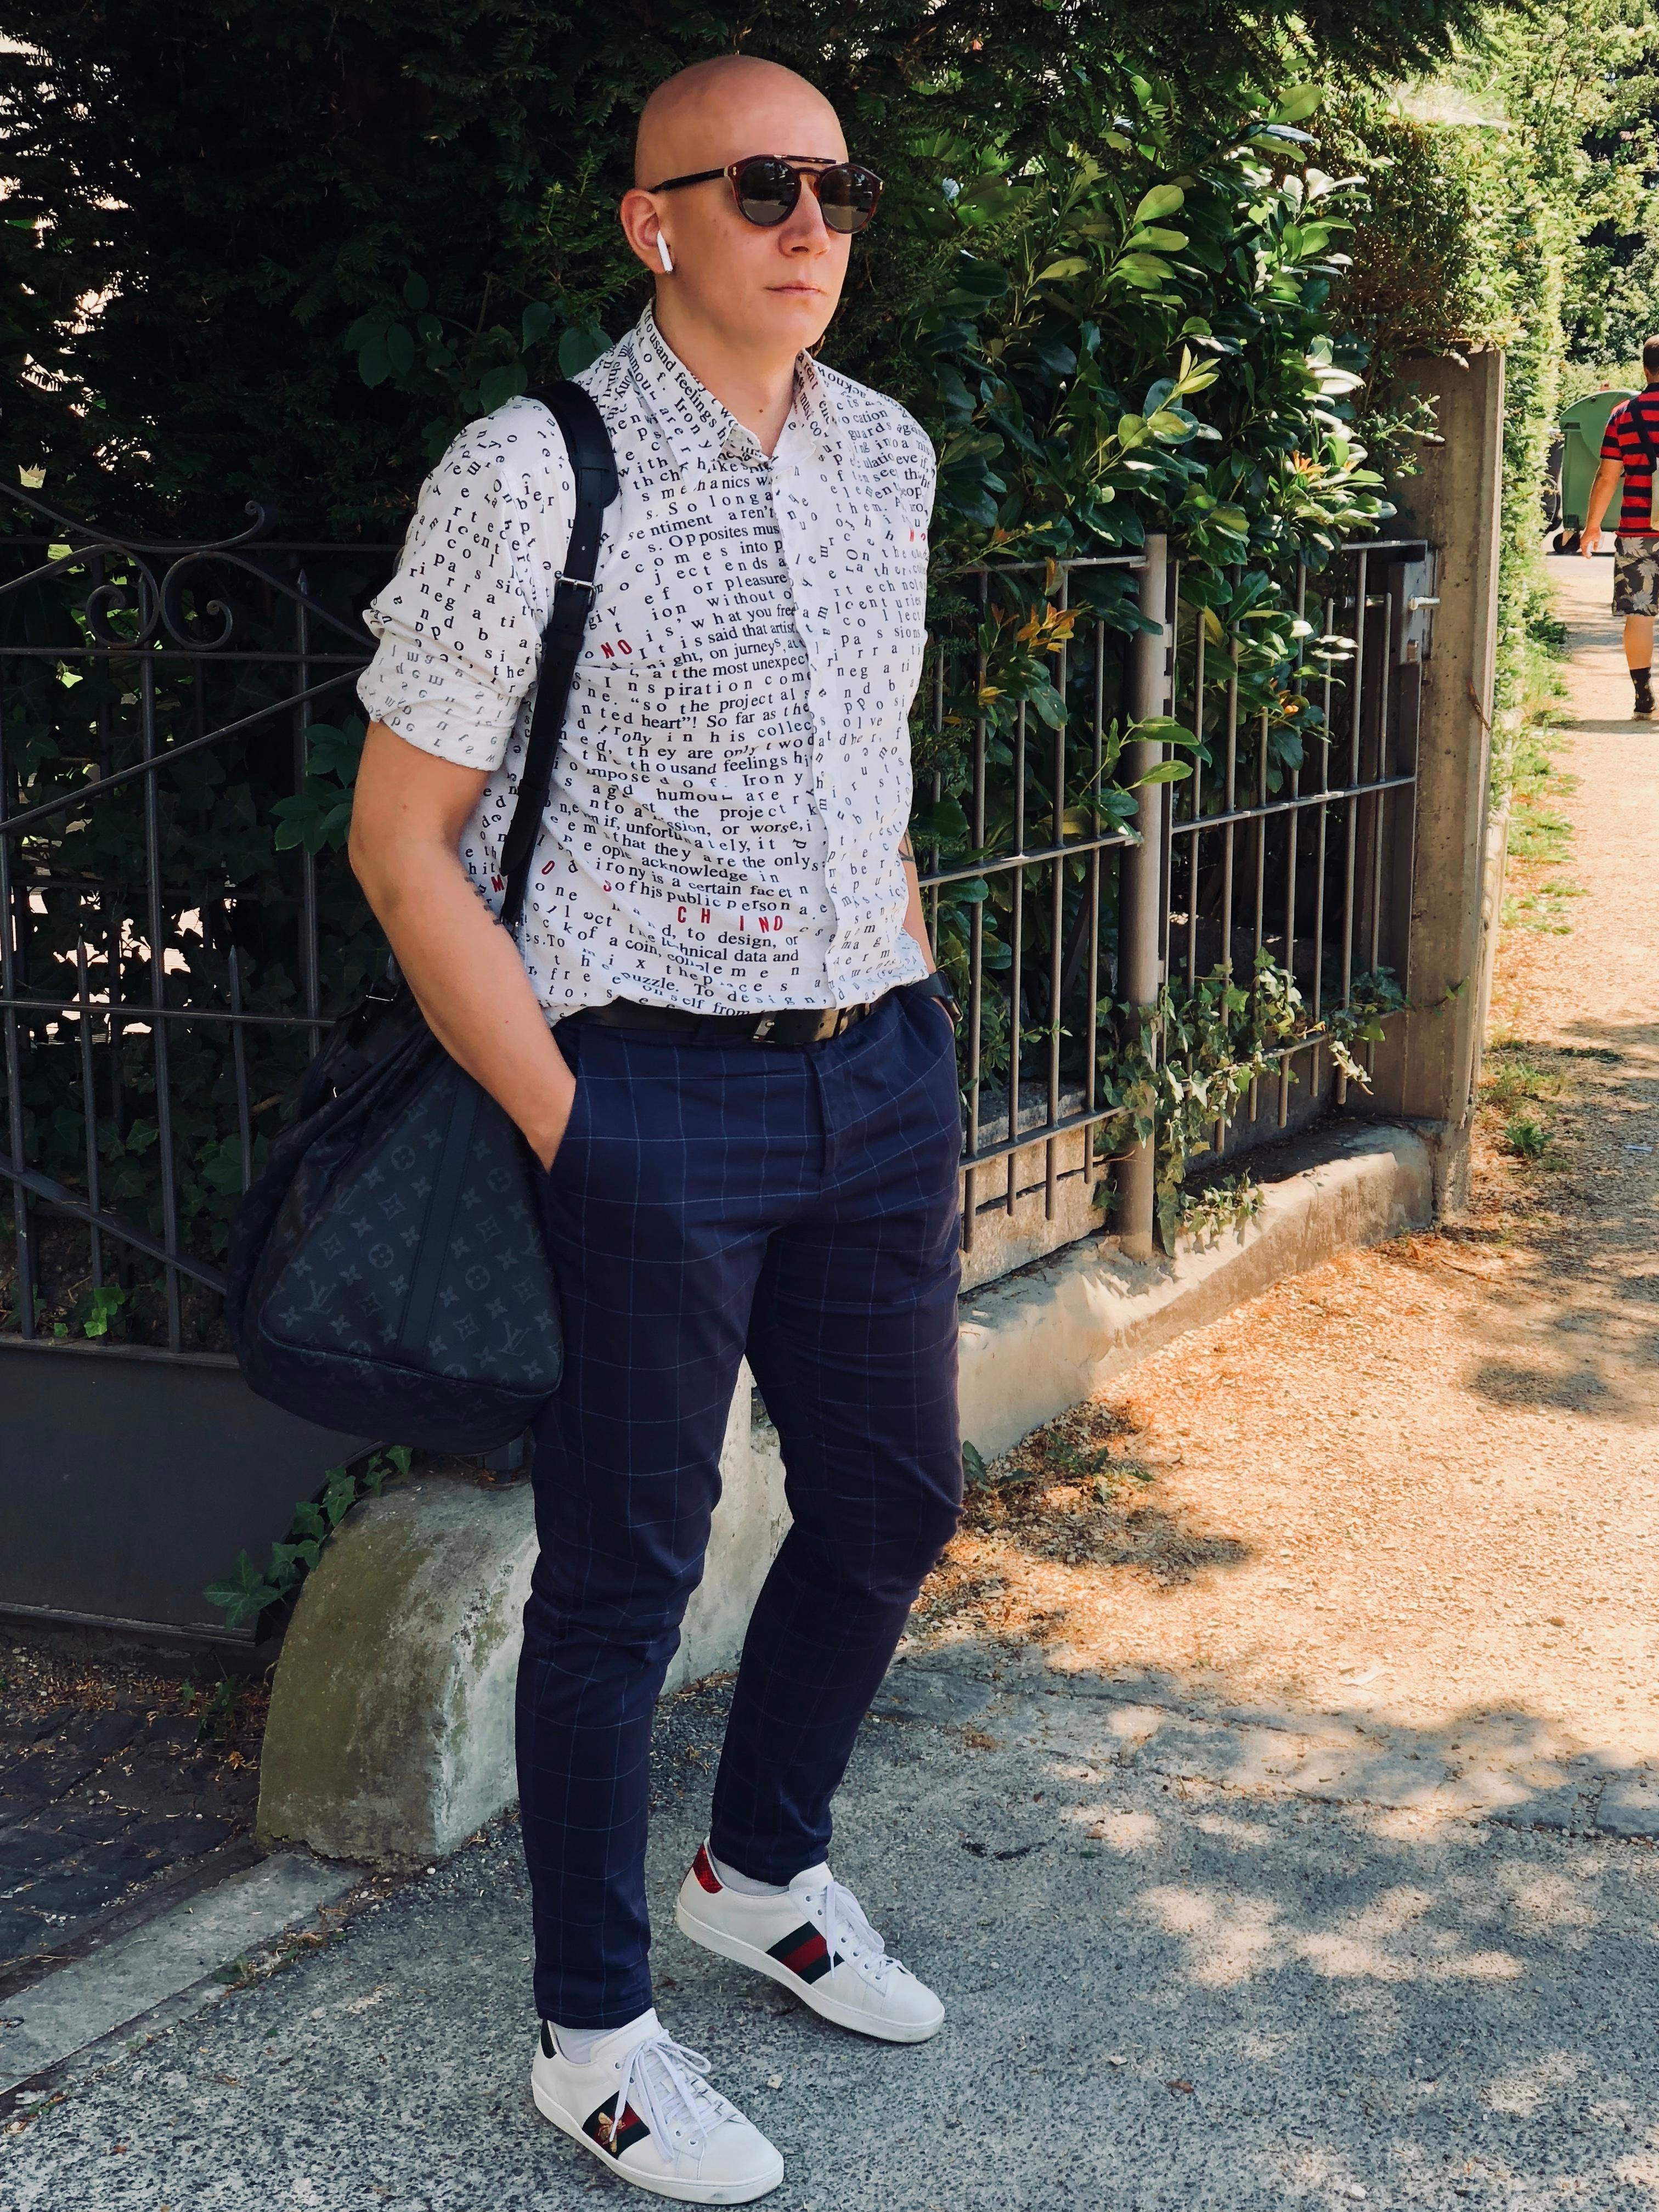 Hot weather business casual look. 😎☀️ #berlin #fashion #look #outfit #menswear #mode #work #business